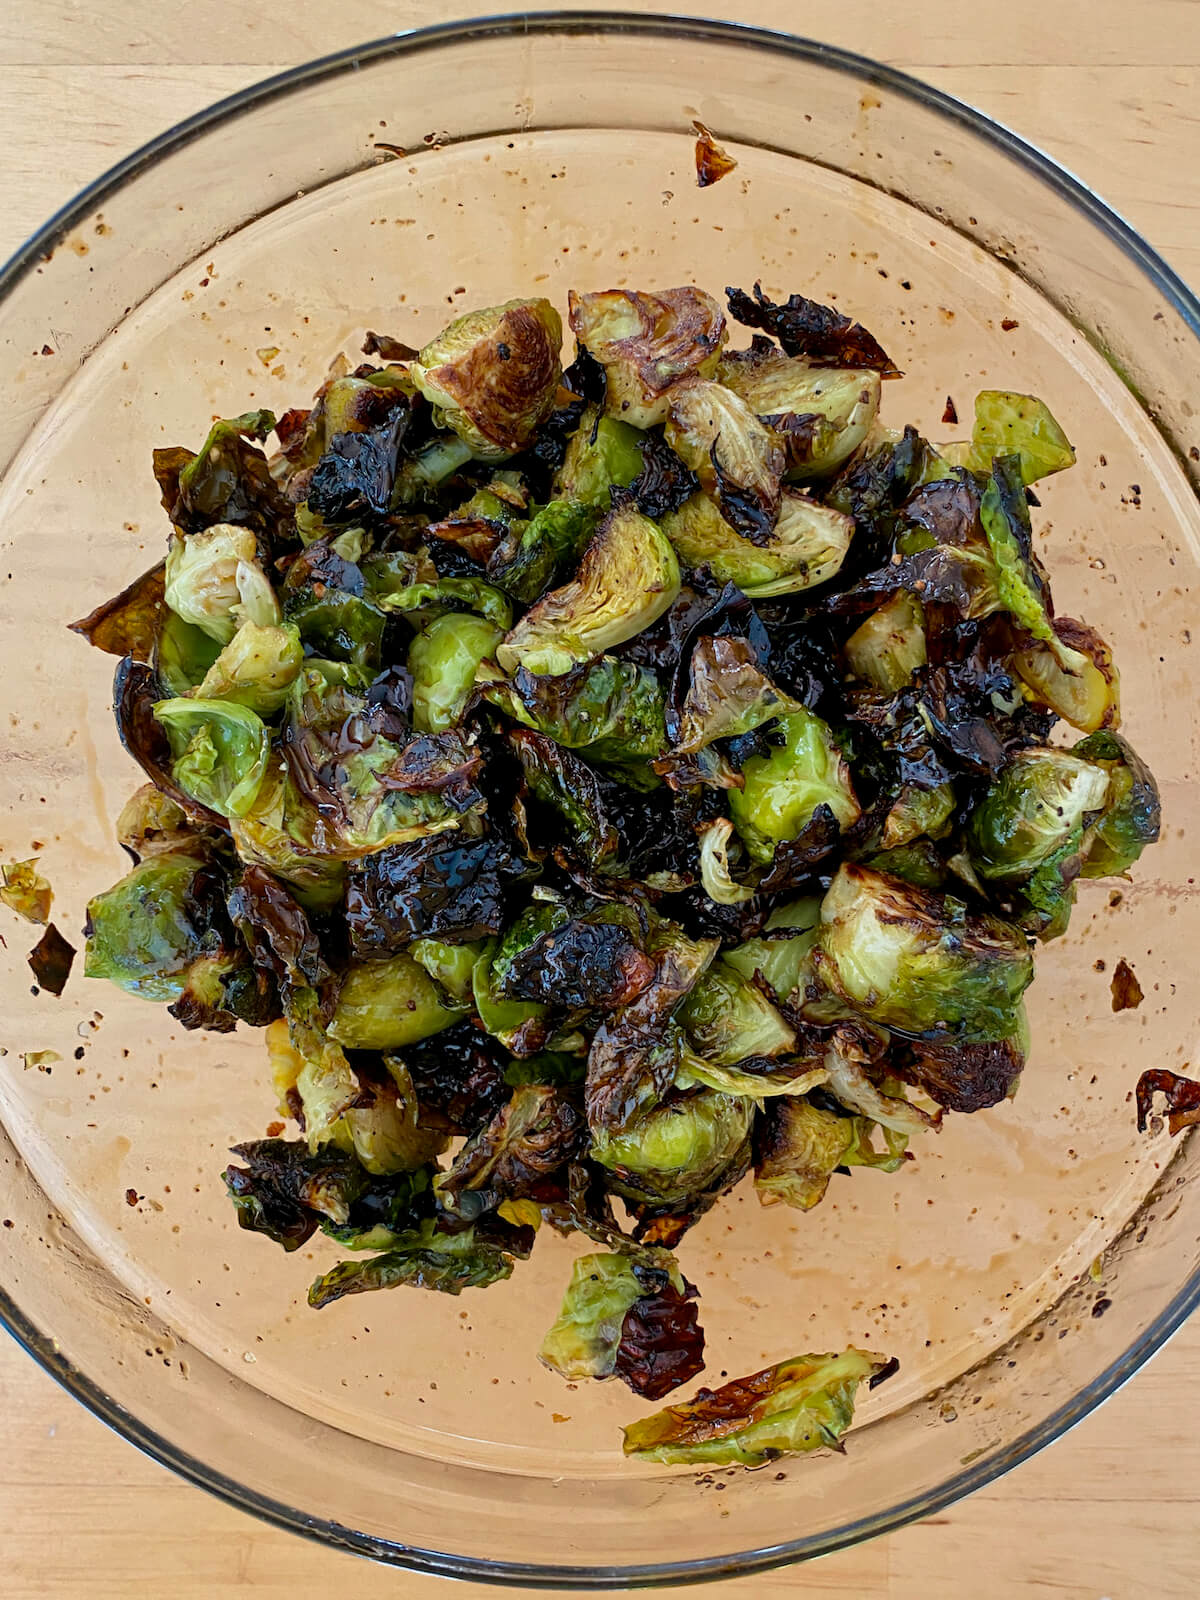 Roasted brussels sprouts tossed with maple balsamic glaze in a glass mixing bowl.